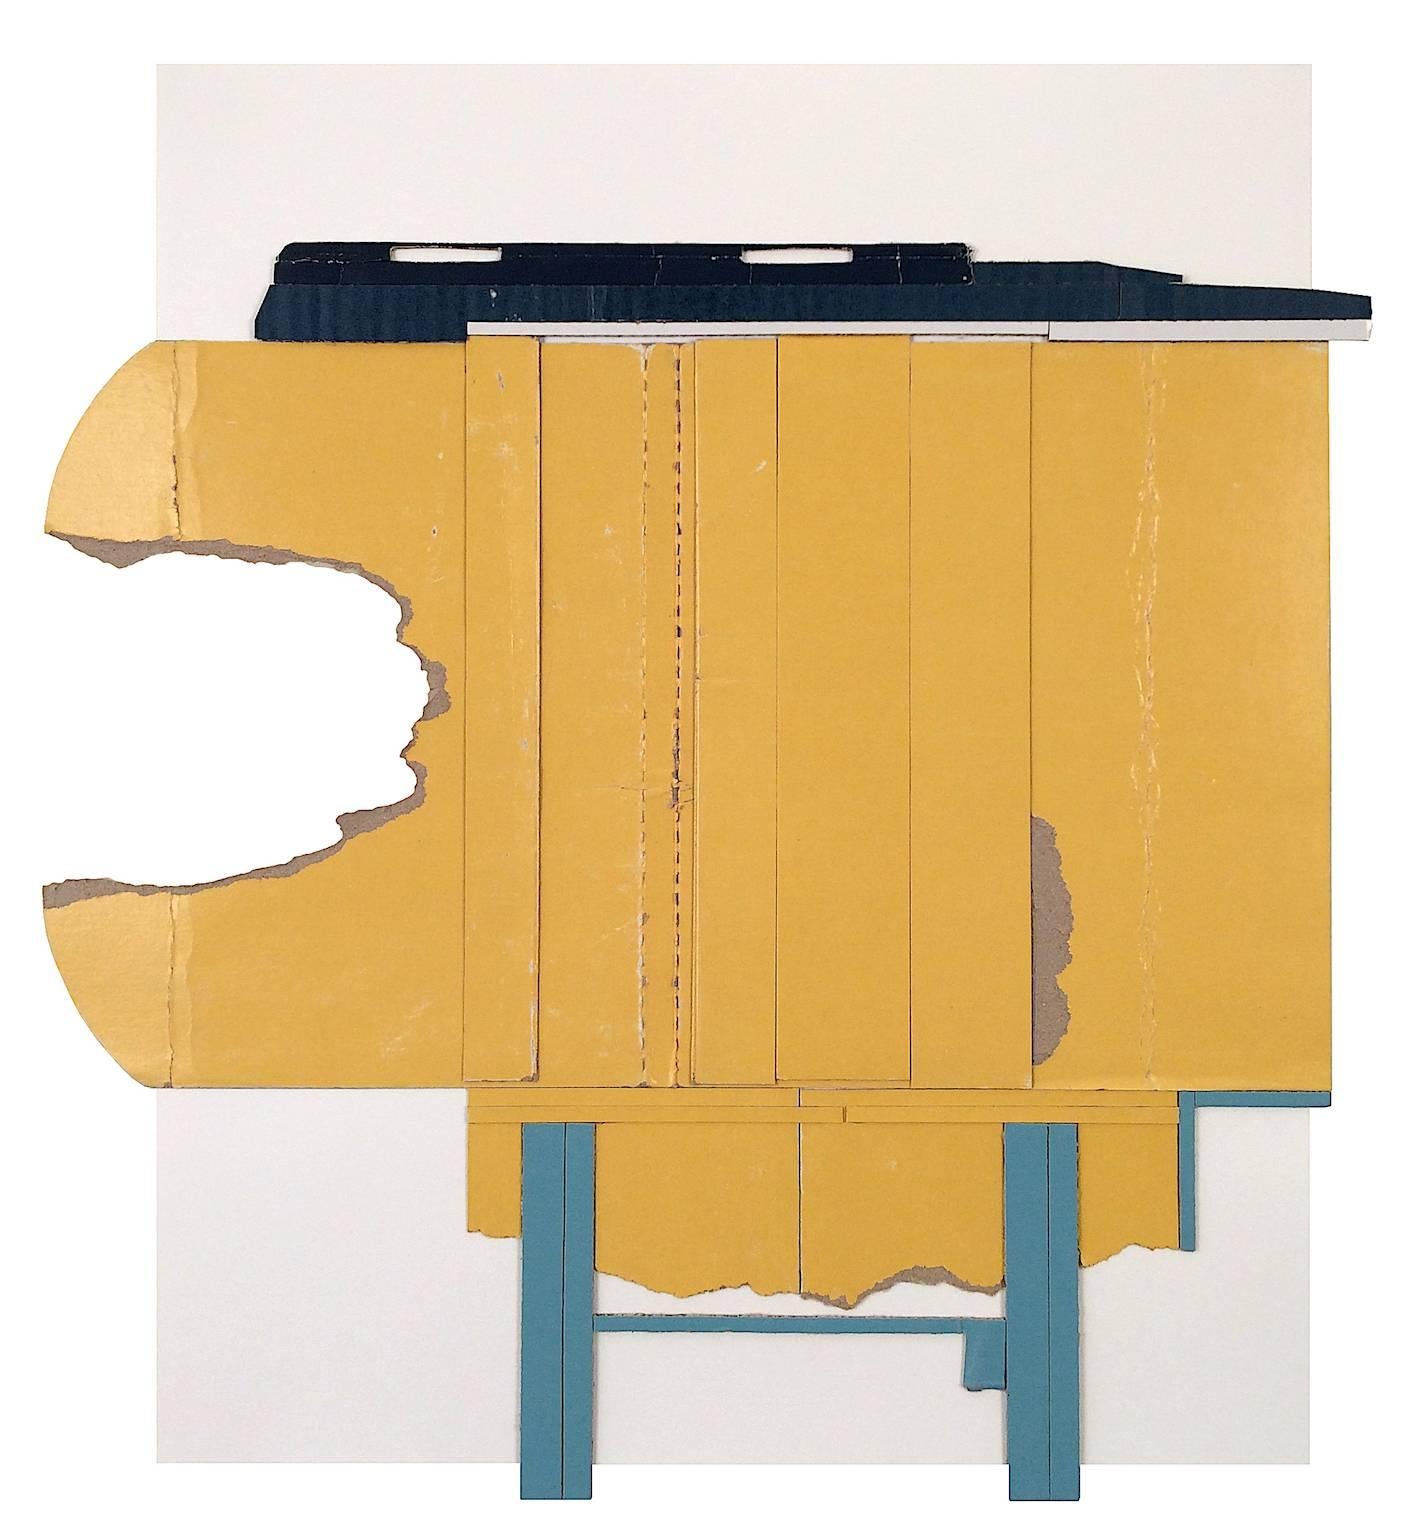 Ryan Sarah Murphy Abstract Sculpture - “Remotion 2”, yellow, turquoise and black collaged architectural wall relief